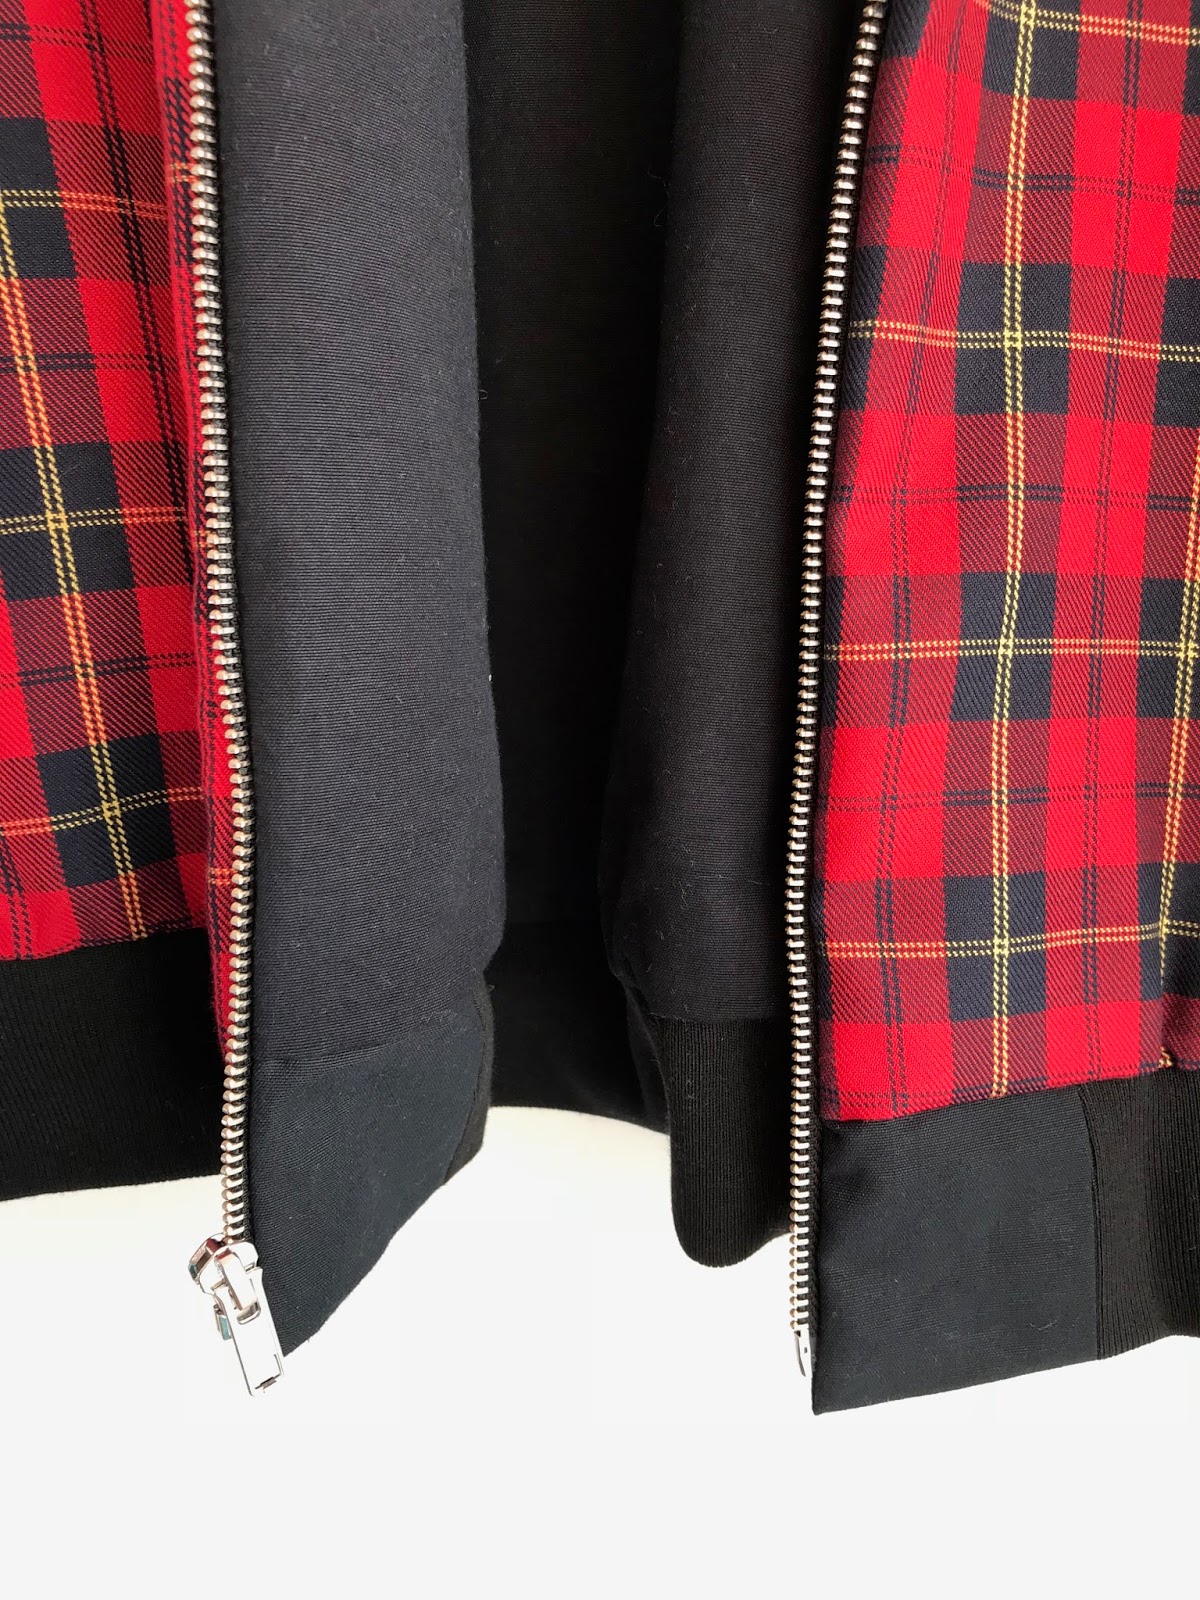 Diary of a Chain Stitcher : A Tartan Lined Harrington Jacket for 